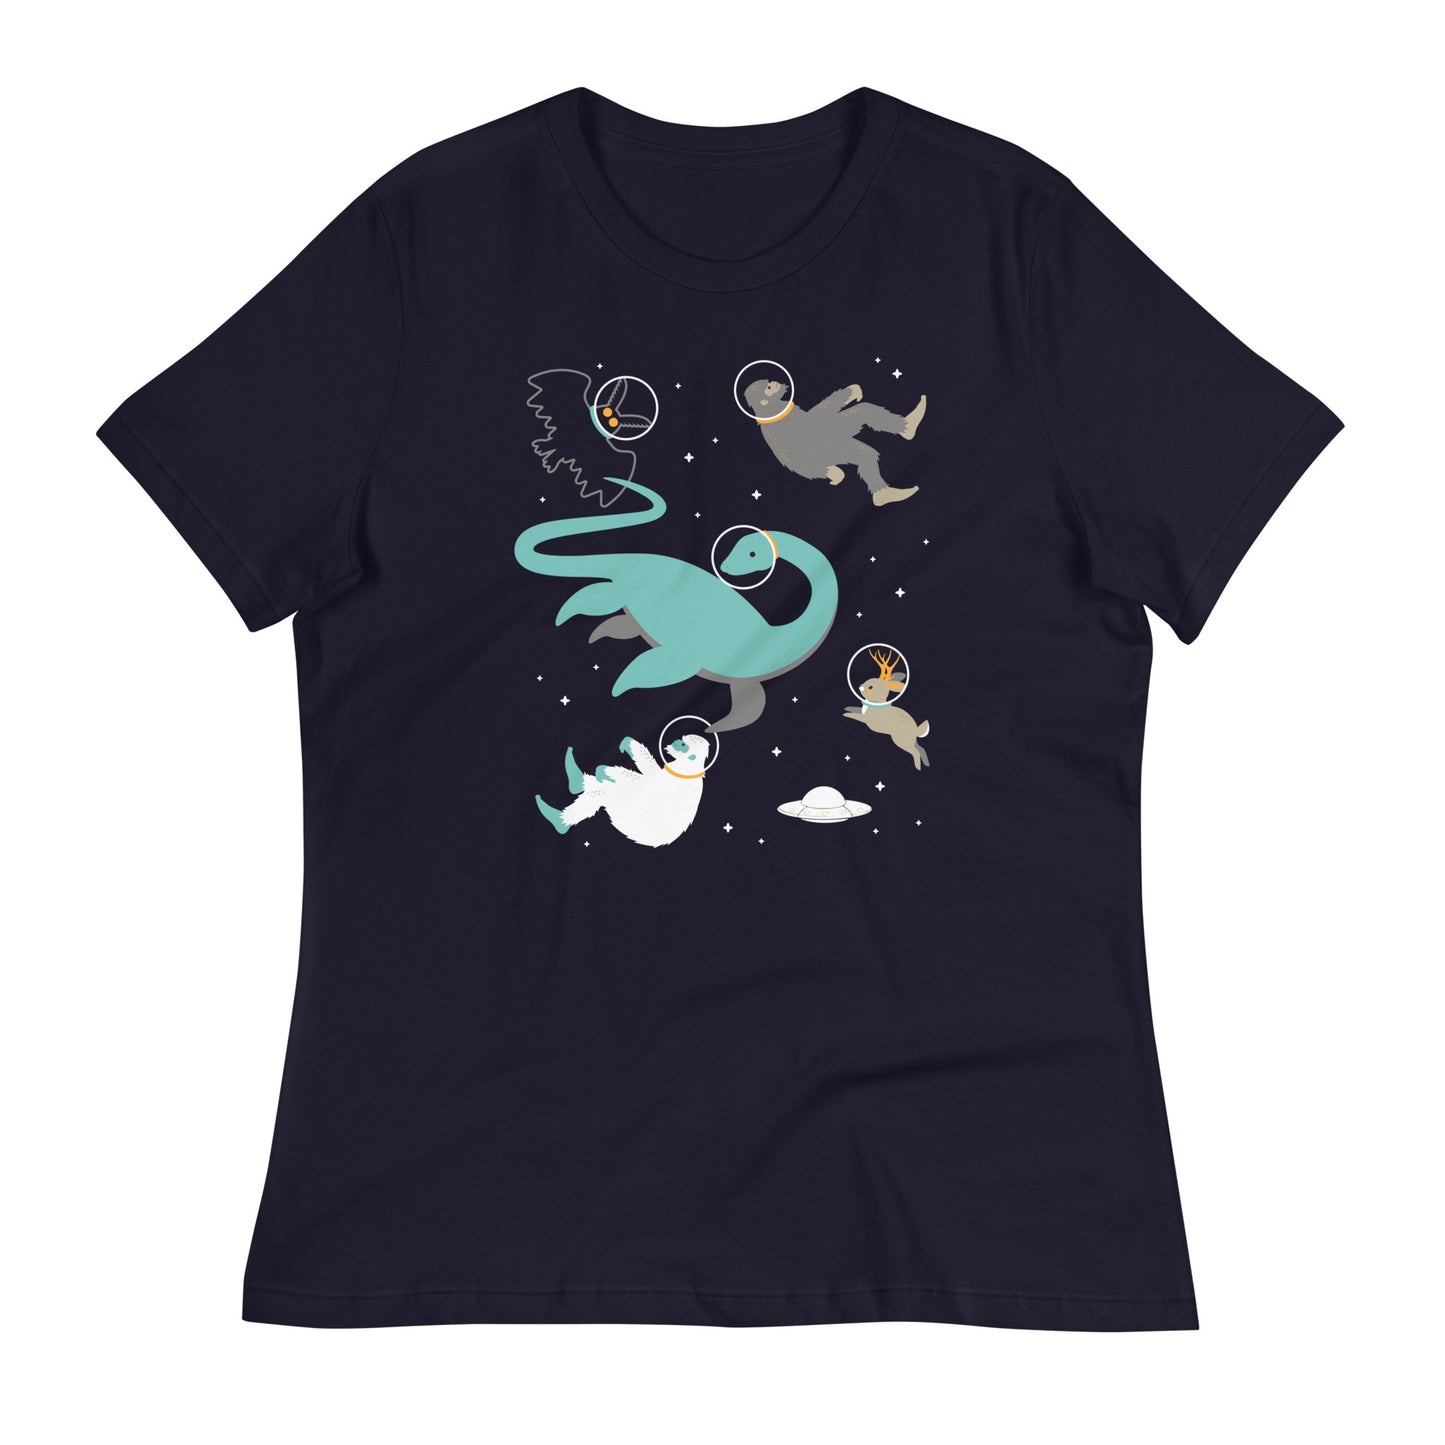 Cryptids In Space Women's Signature Tee